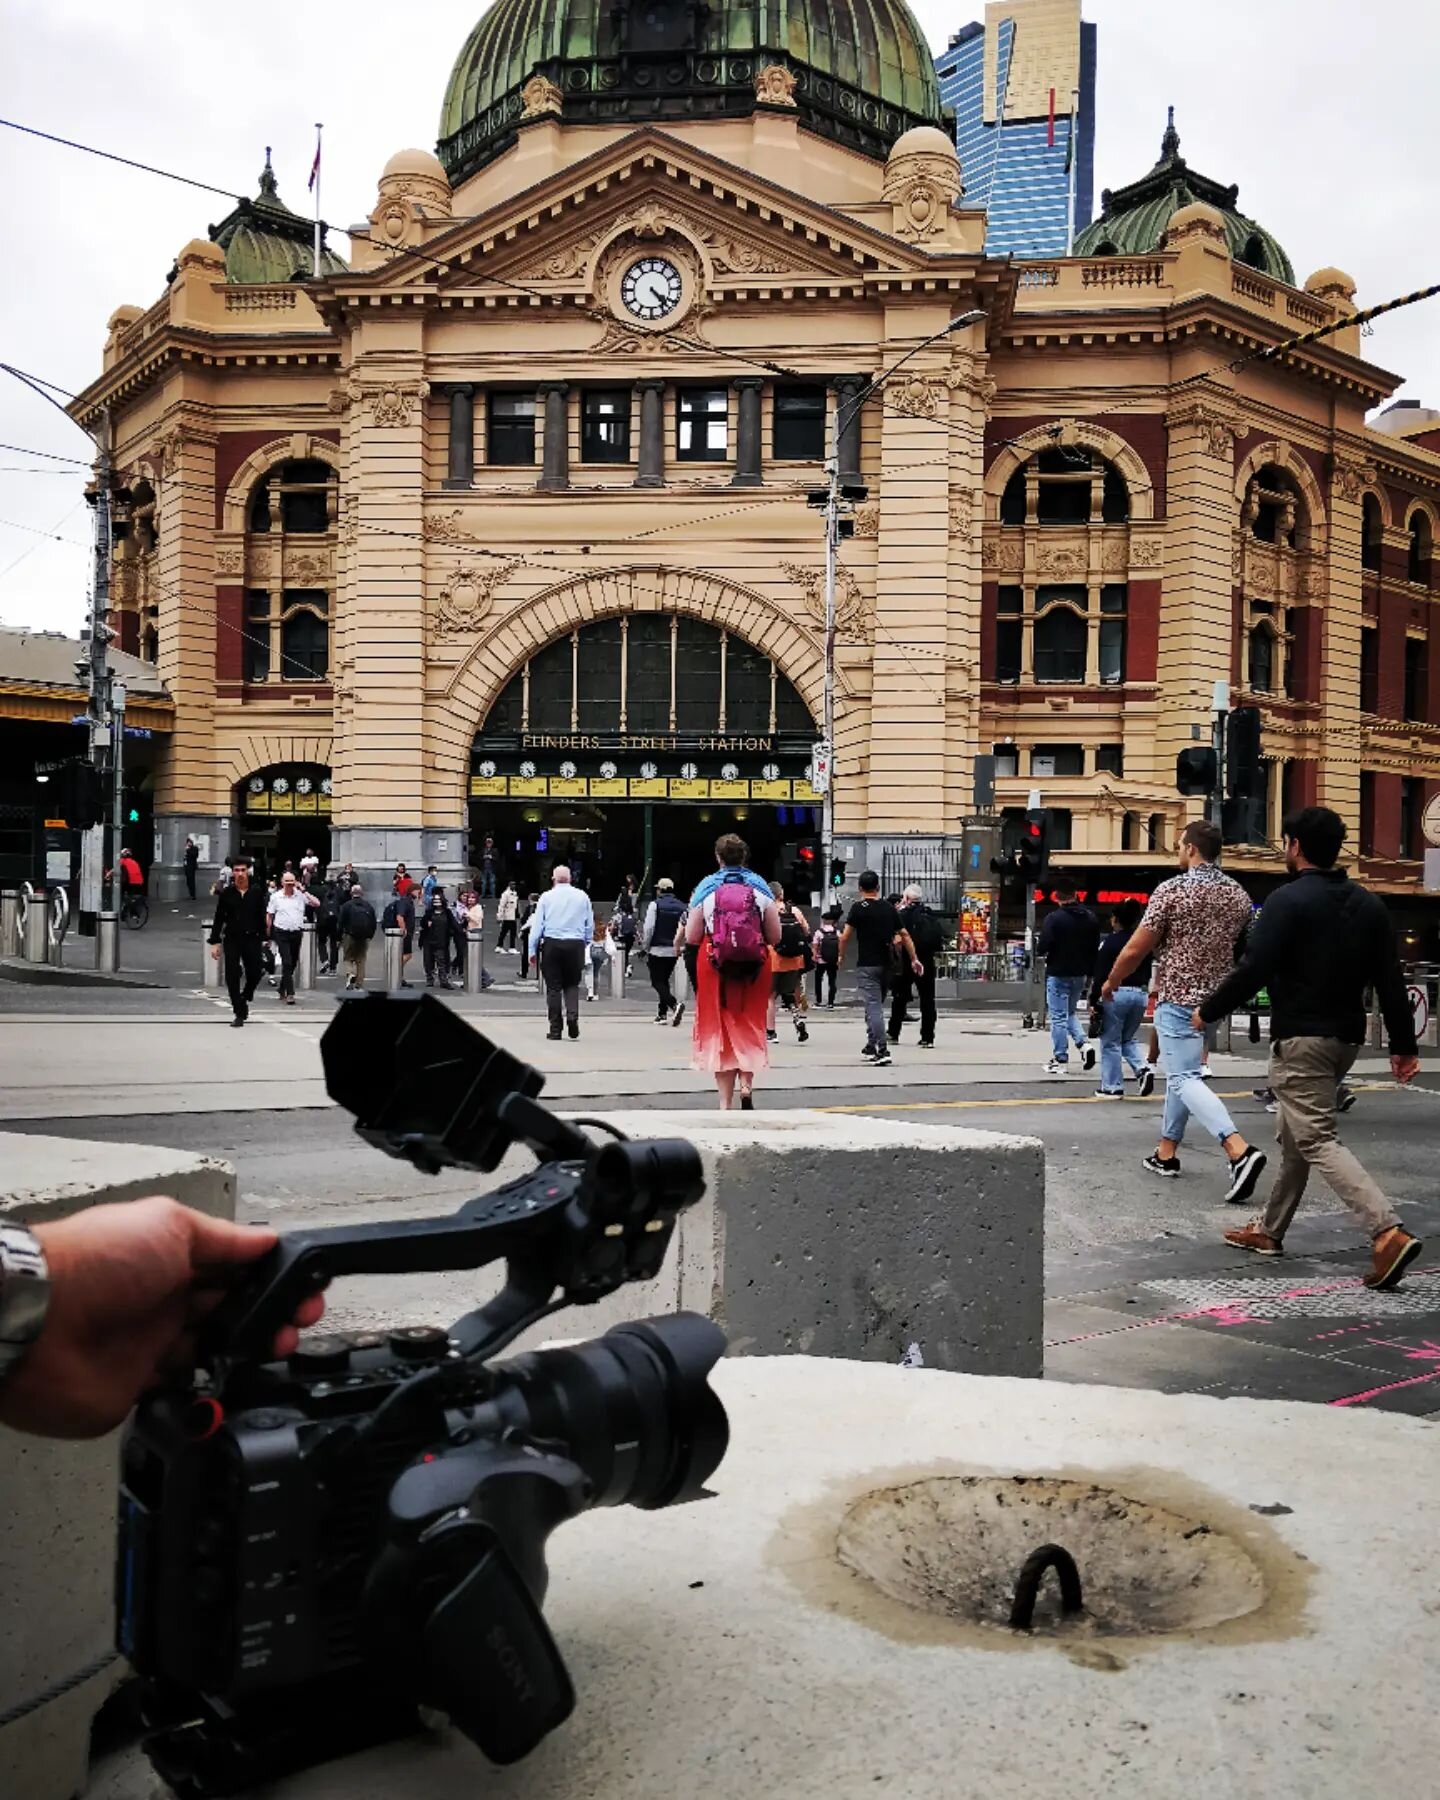 The Sony FX6 is the perfect light weight package for interstate travel. #melbourne
#flindersstreetrailwaystation 
.
.
.
.
#sonyfx6 #fullframe #videoproduction #videography #fx6 #portable #travellife #travelvideography #travellight #camerlife #sonyalp